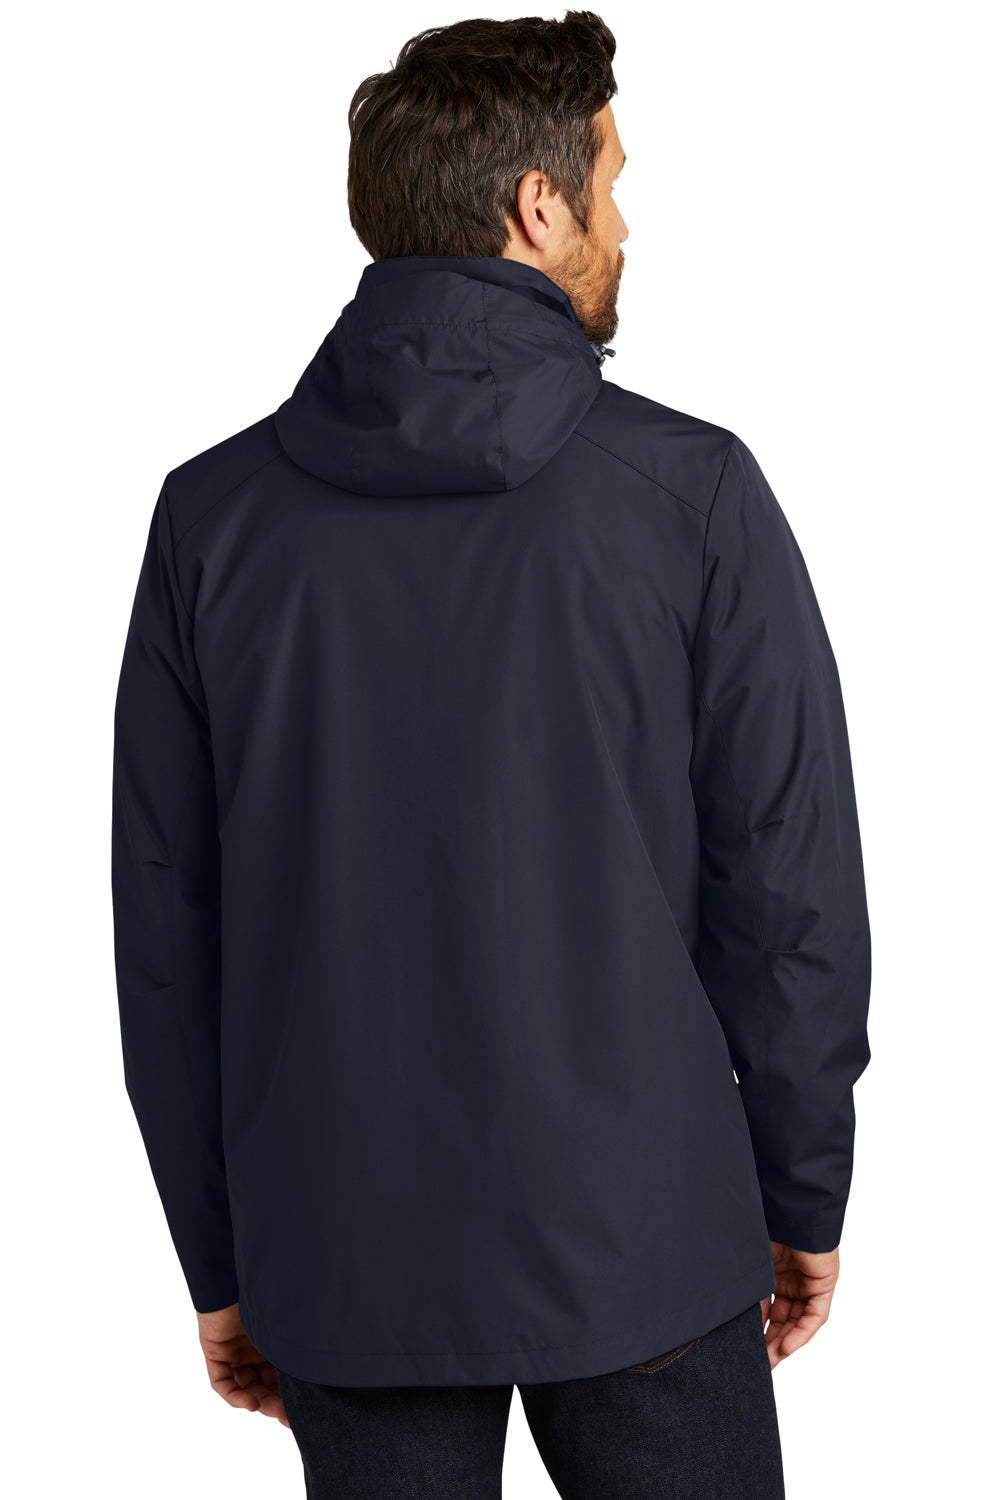 Port Authority J123 Mens All Weather 3 in 1 Full Zip Hooded Jacket River Navy Blue Back